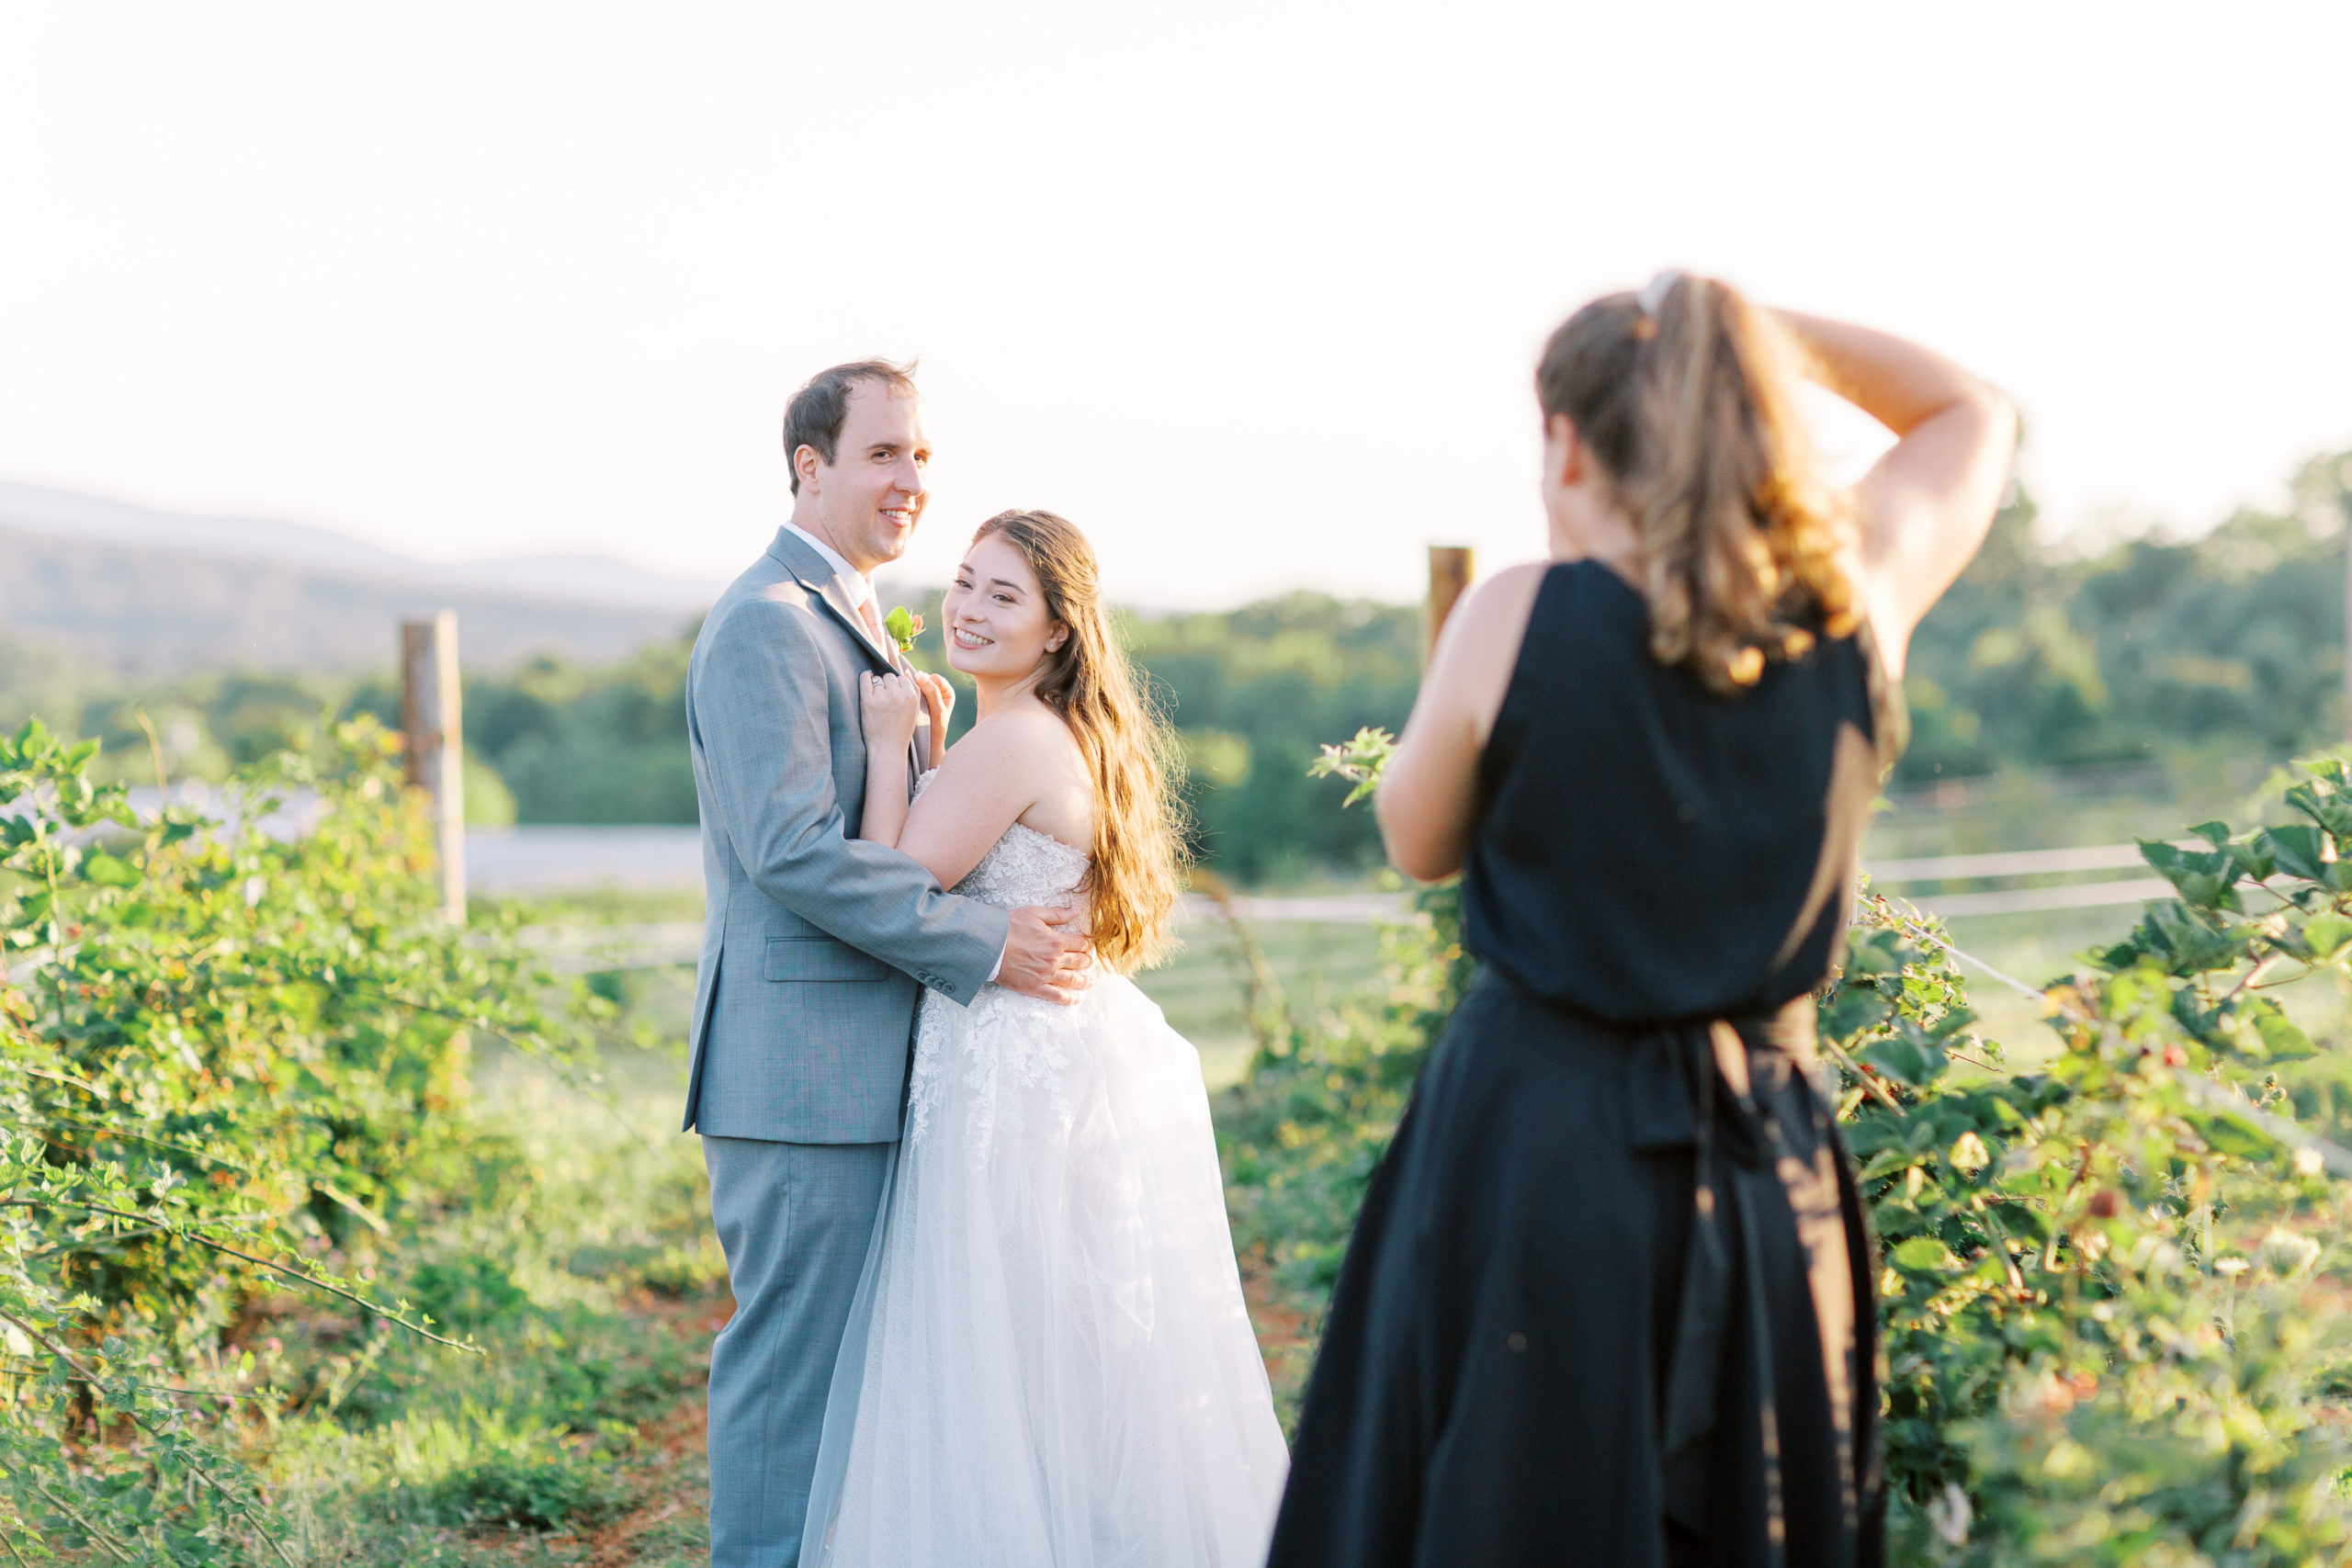 Market at Grelen wedding photographer capturing bride and groom in the vines at sunset.